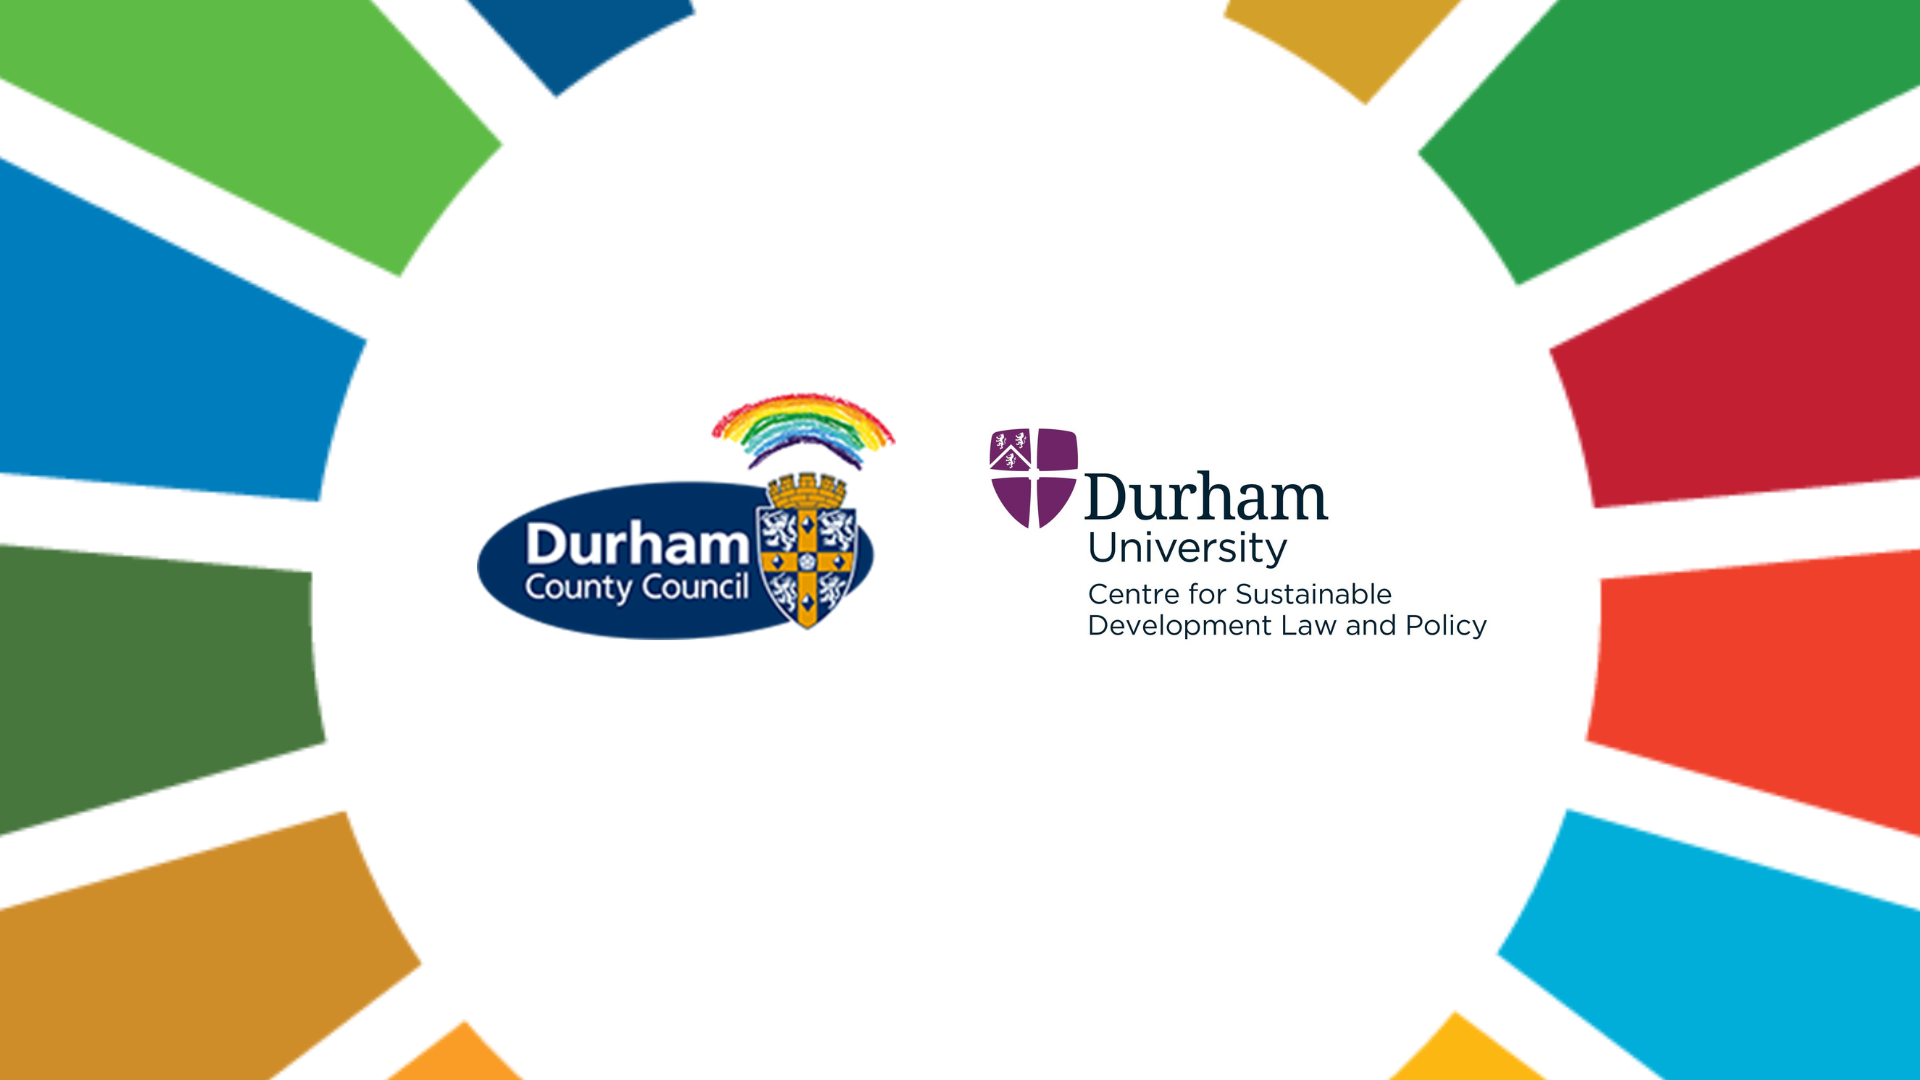 logos of Durham County Council and CSDLP